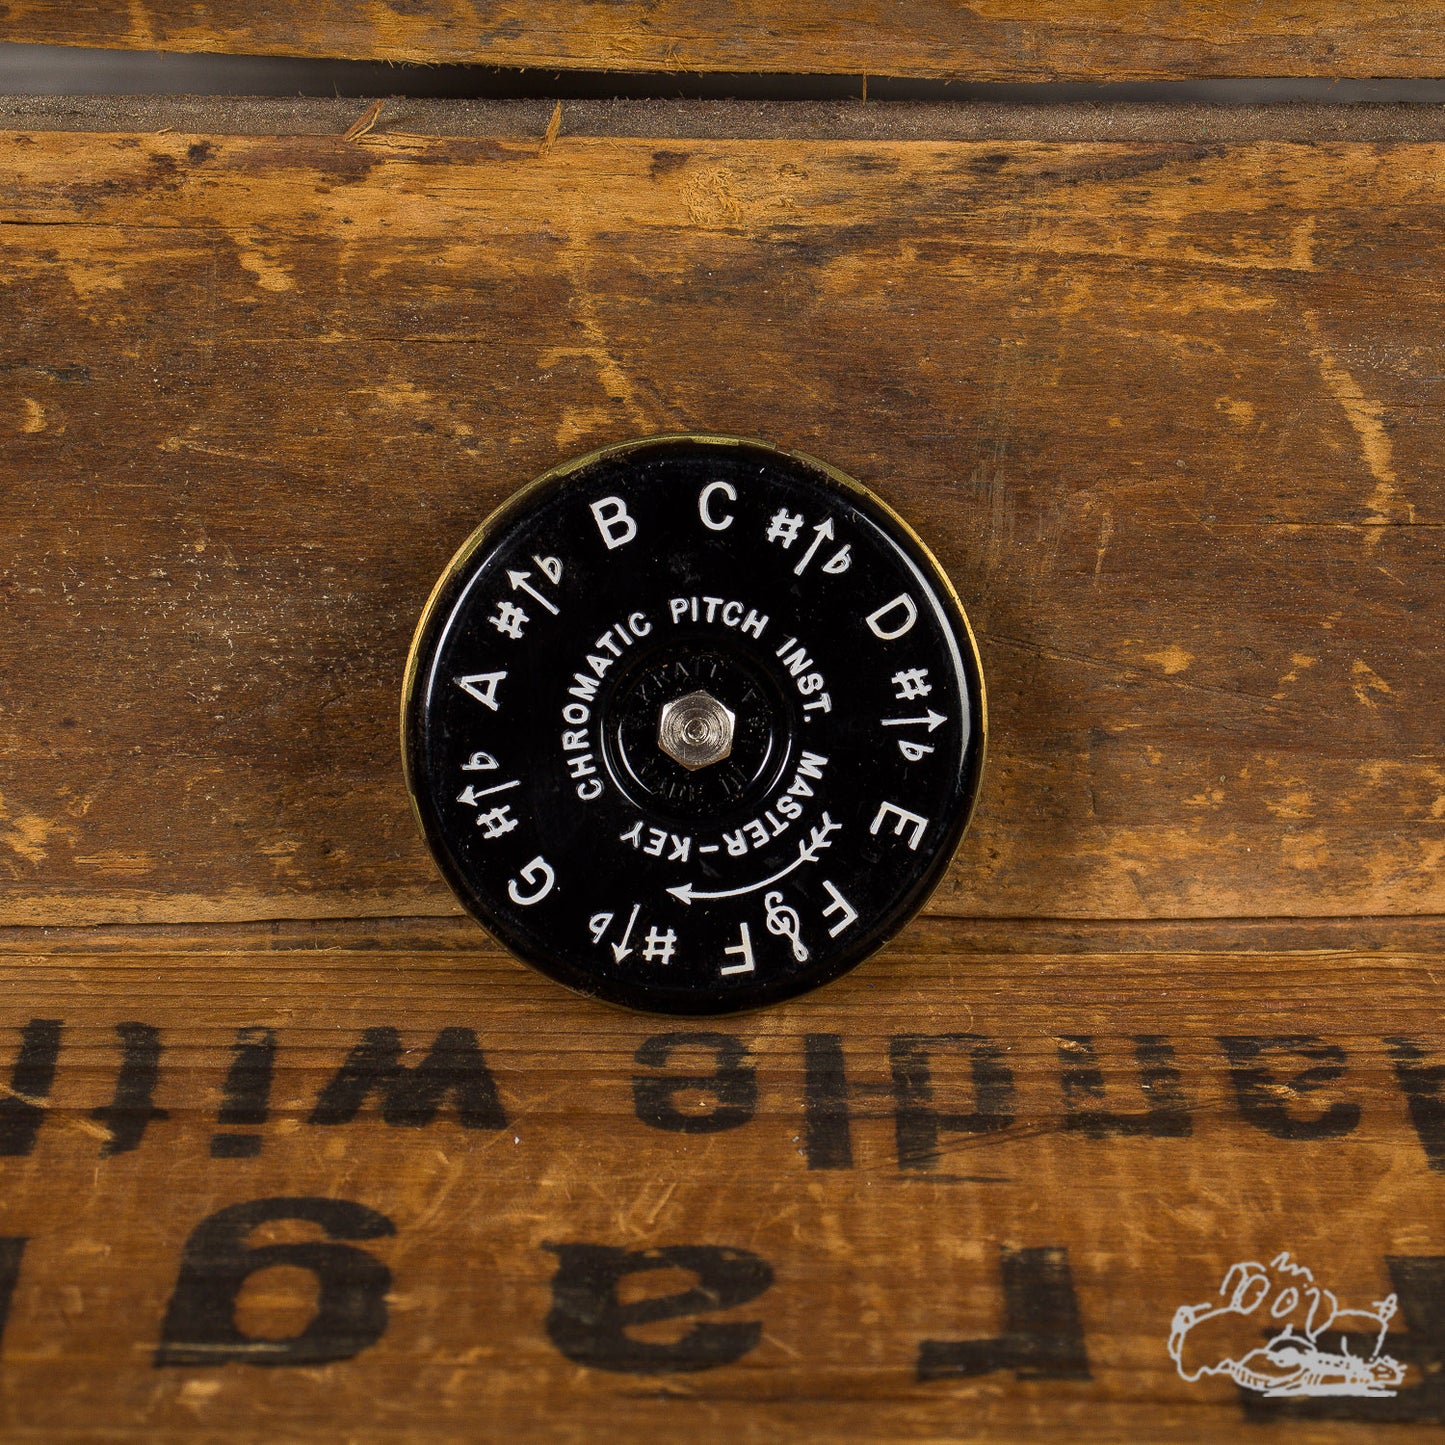 The Master Key Chromatic Pitch Pipe